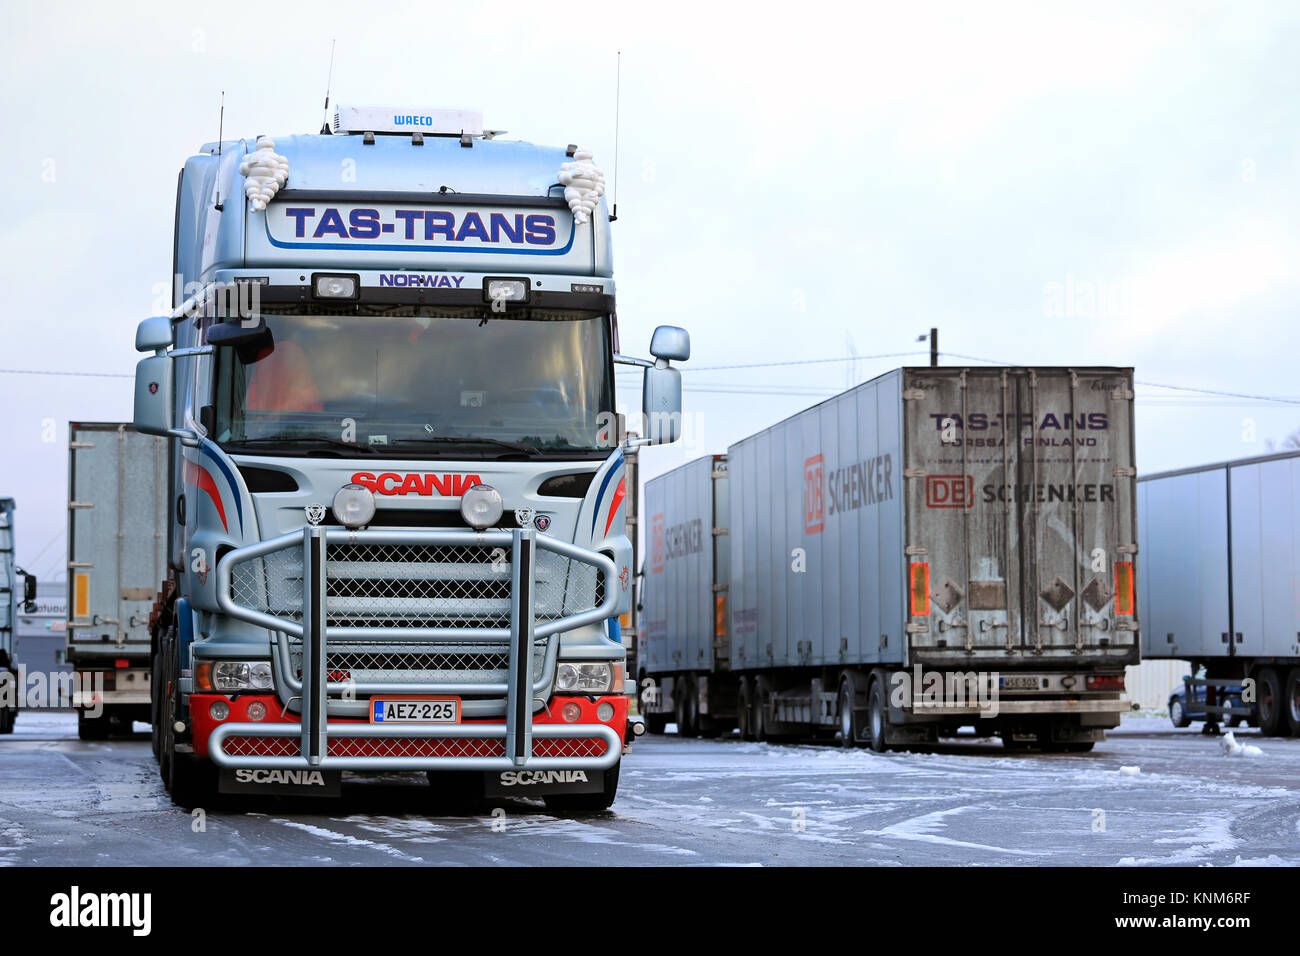 FORSSA, FINLAND - DECEMBER 20, 2014: Fleet of Scania trailer trucks on a yard. Demand for heavy trucks is increasing while the need for medium-duty ha Stock Photo